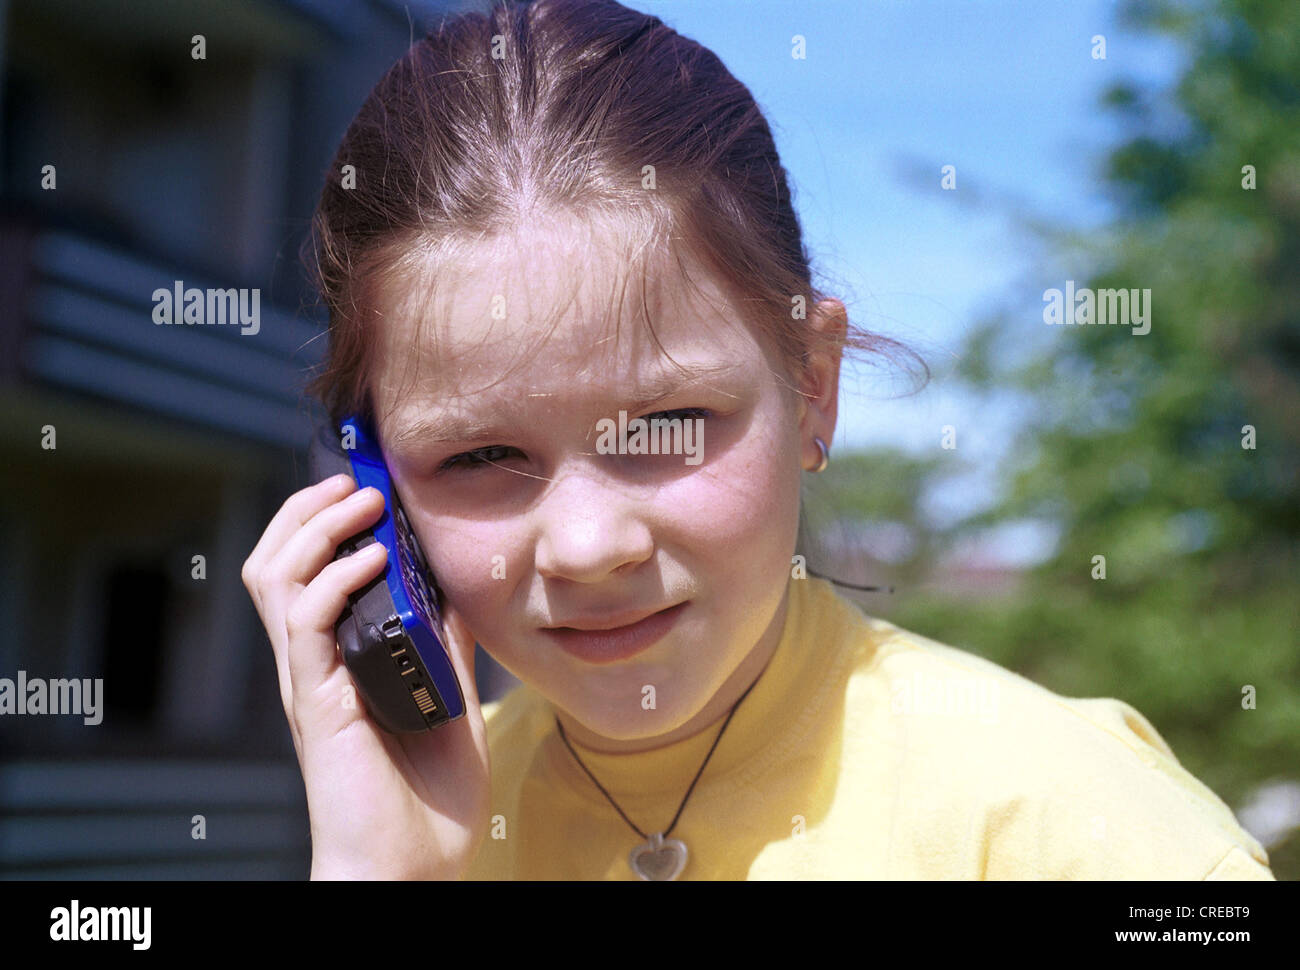 Child with mobile phone, Essen, Germany Stock Photo